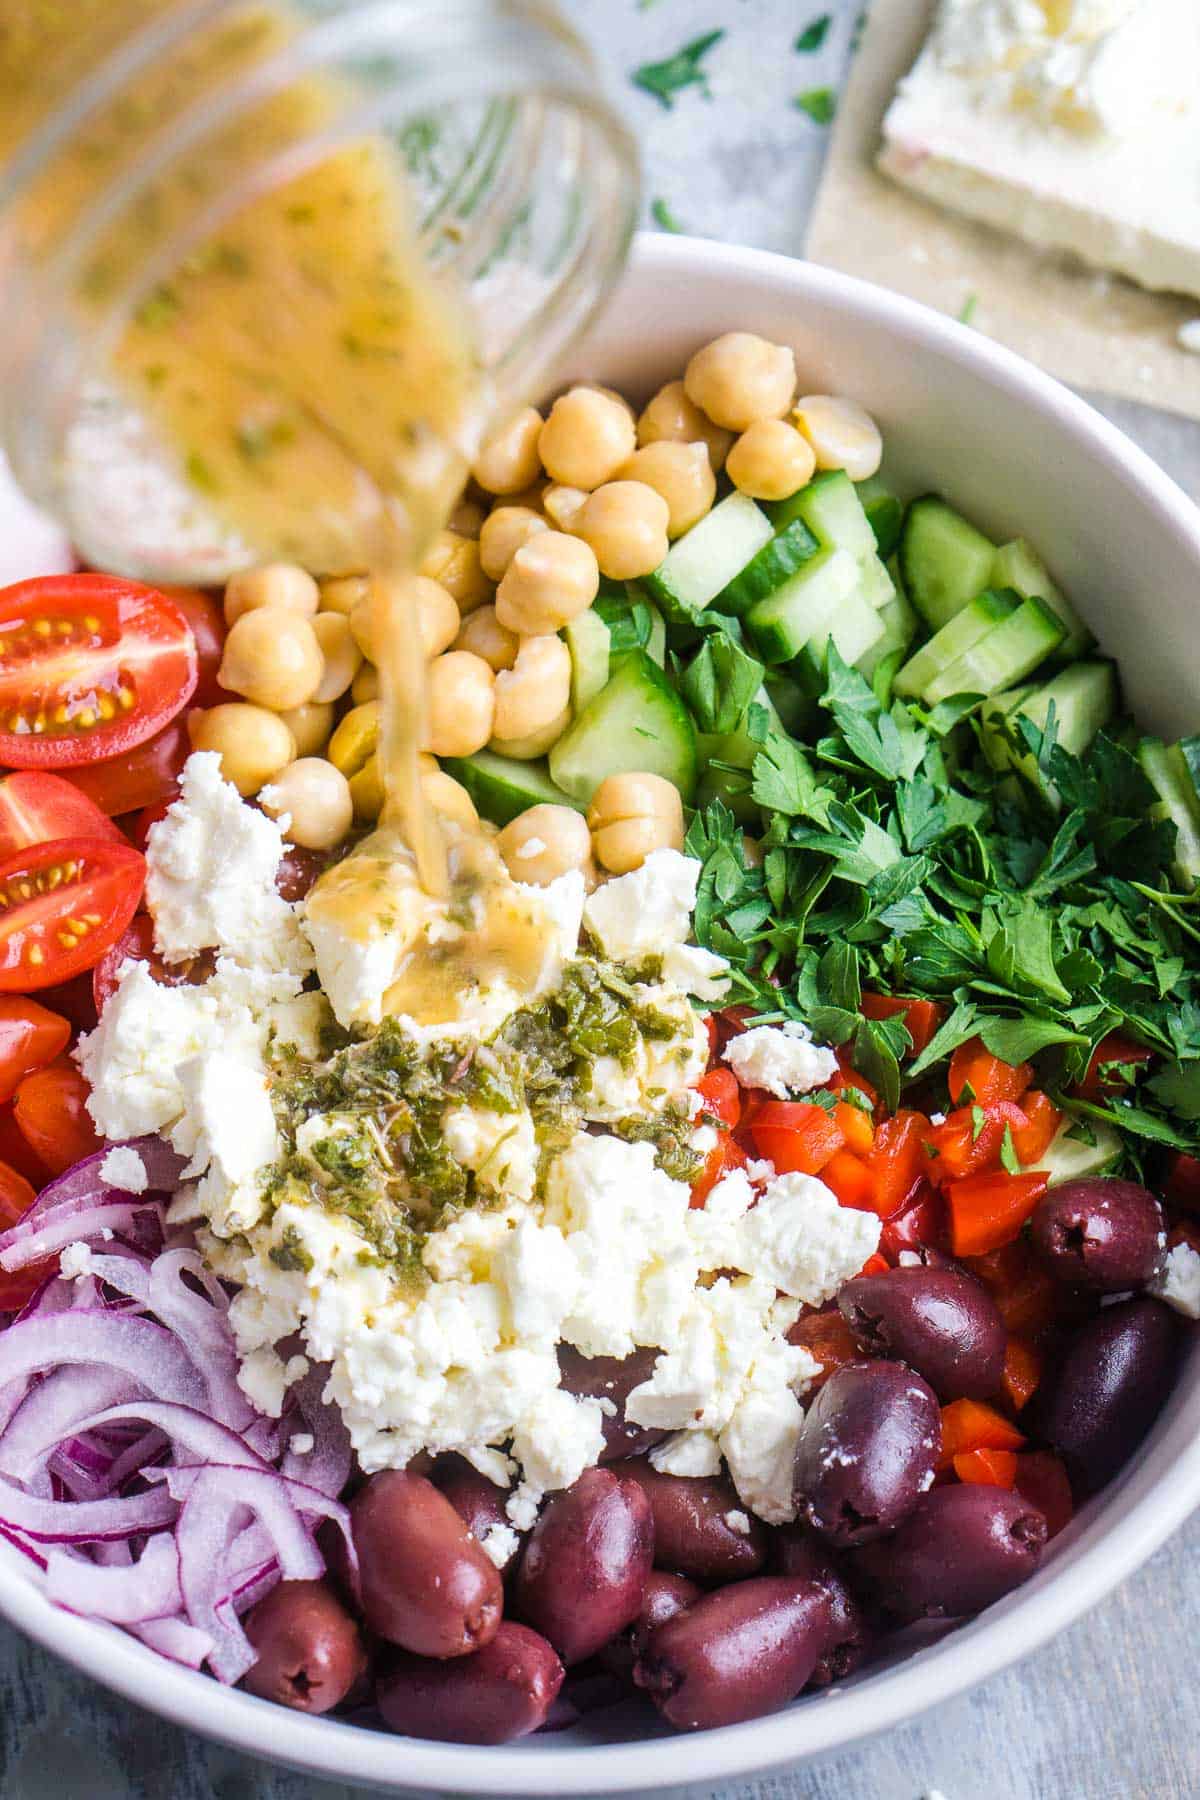 Greek dressing is pouring over Greek chickpea salad in white bowl